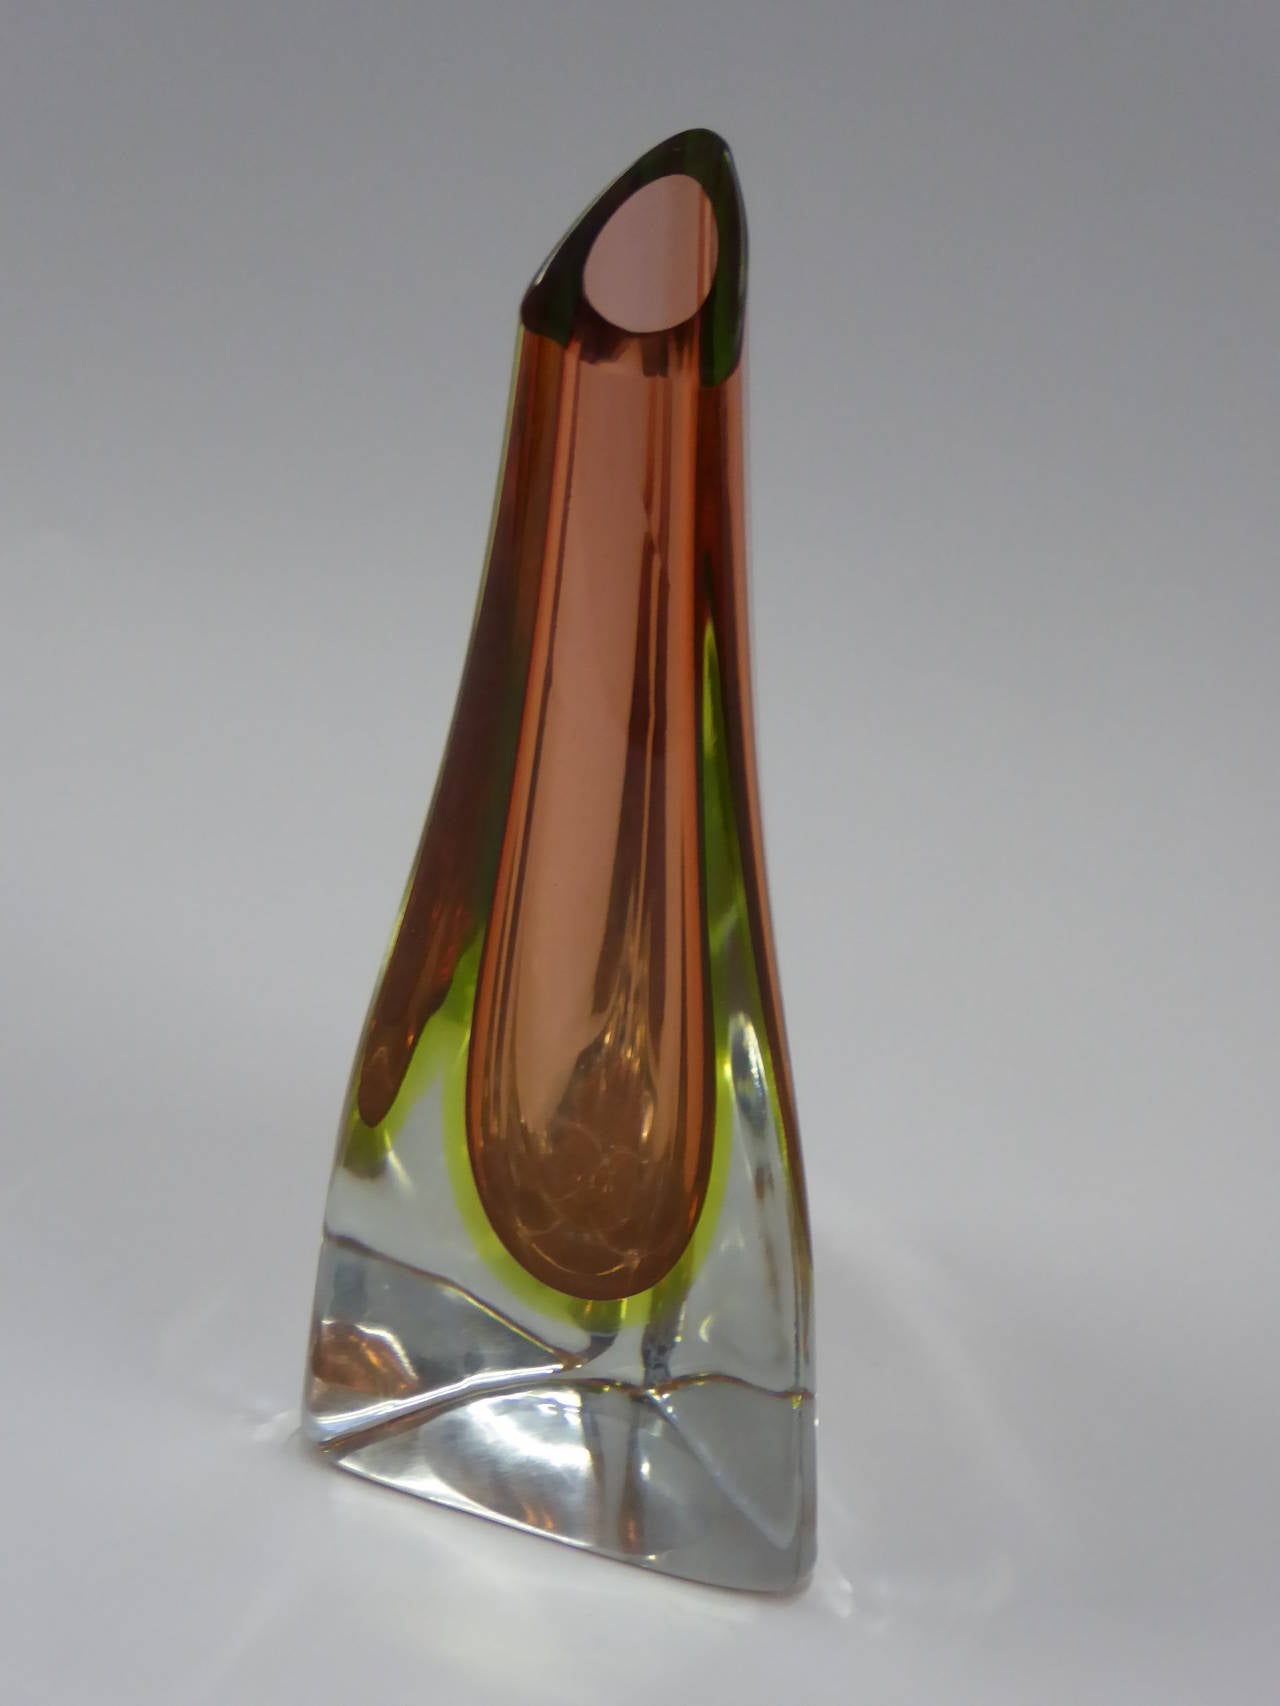 SOLD  Three-sided or trifoglio, this Cenedese Sommerso vase has pink casing and uranium green inside clear crystal blown glass and a slanted mouth. Exquisite Murano vase. Unsigned.

Measurements:
9 1/2